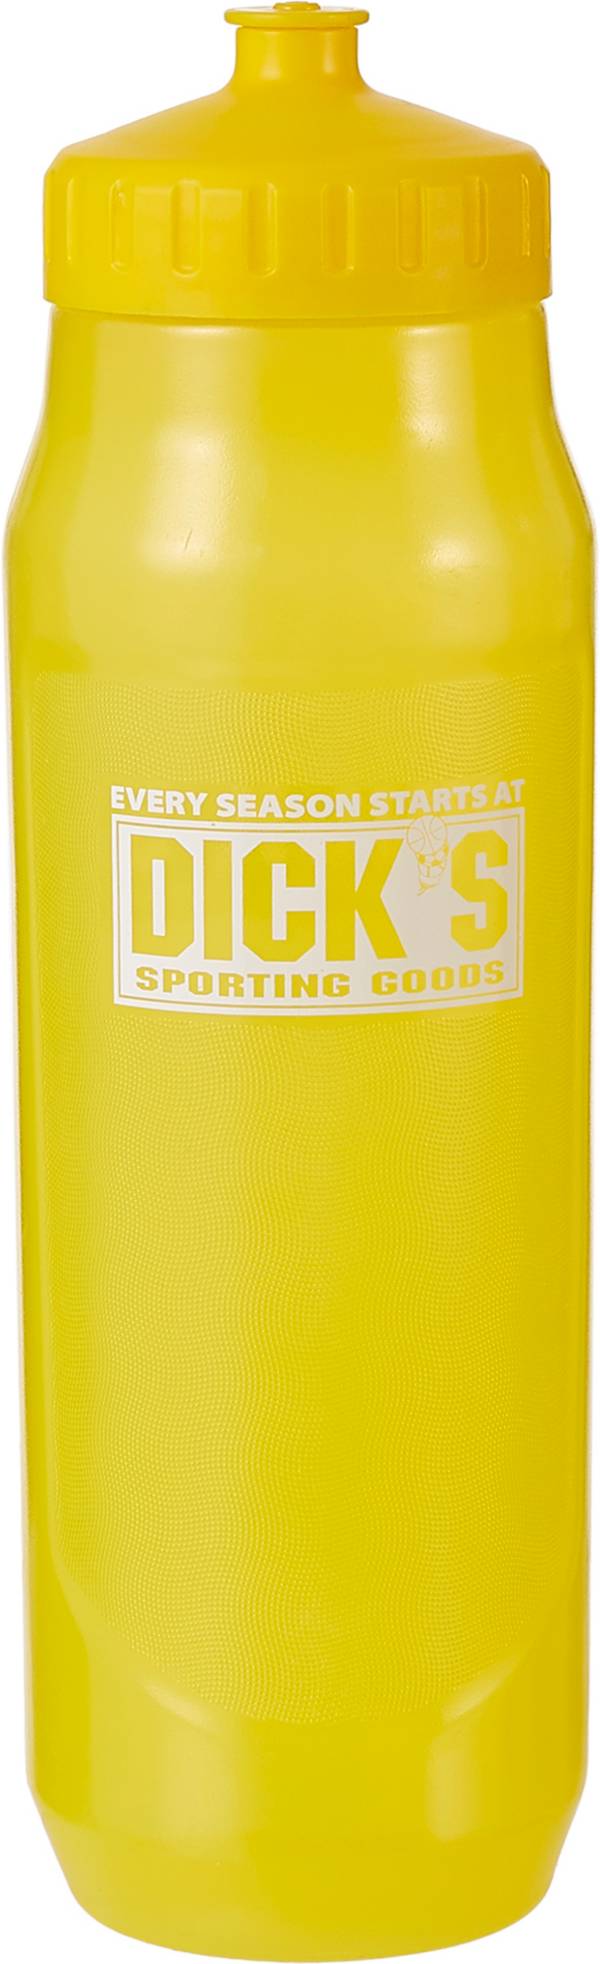 DICK'S Sporting Goods Colorful Push Cap 32 oz. Squeeze Bottle product image